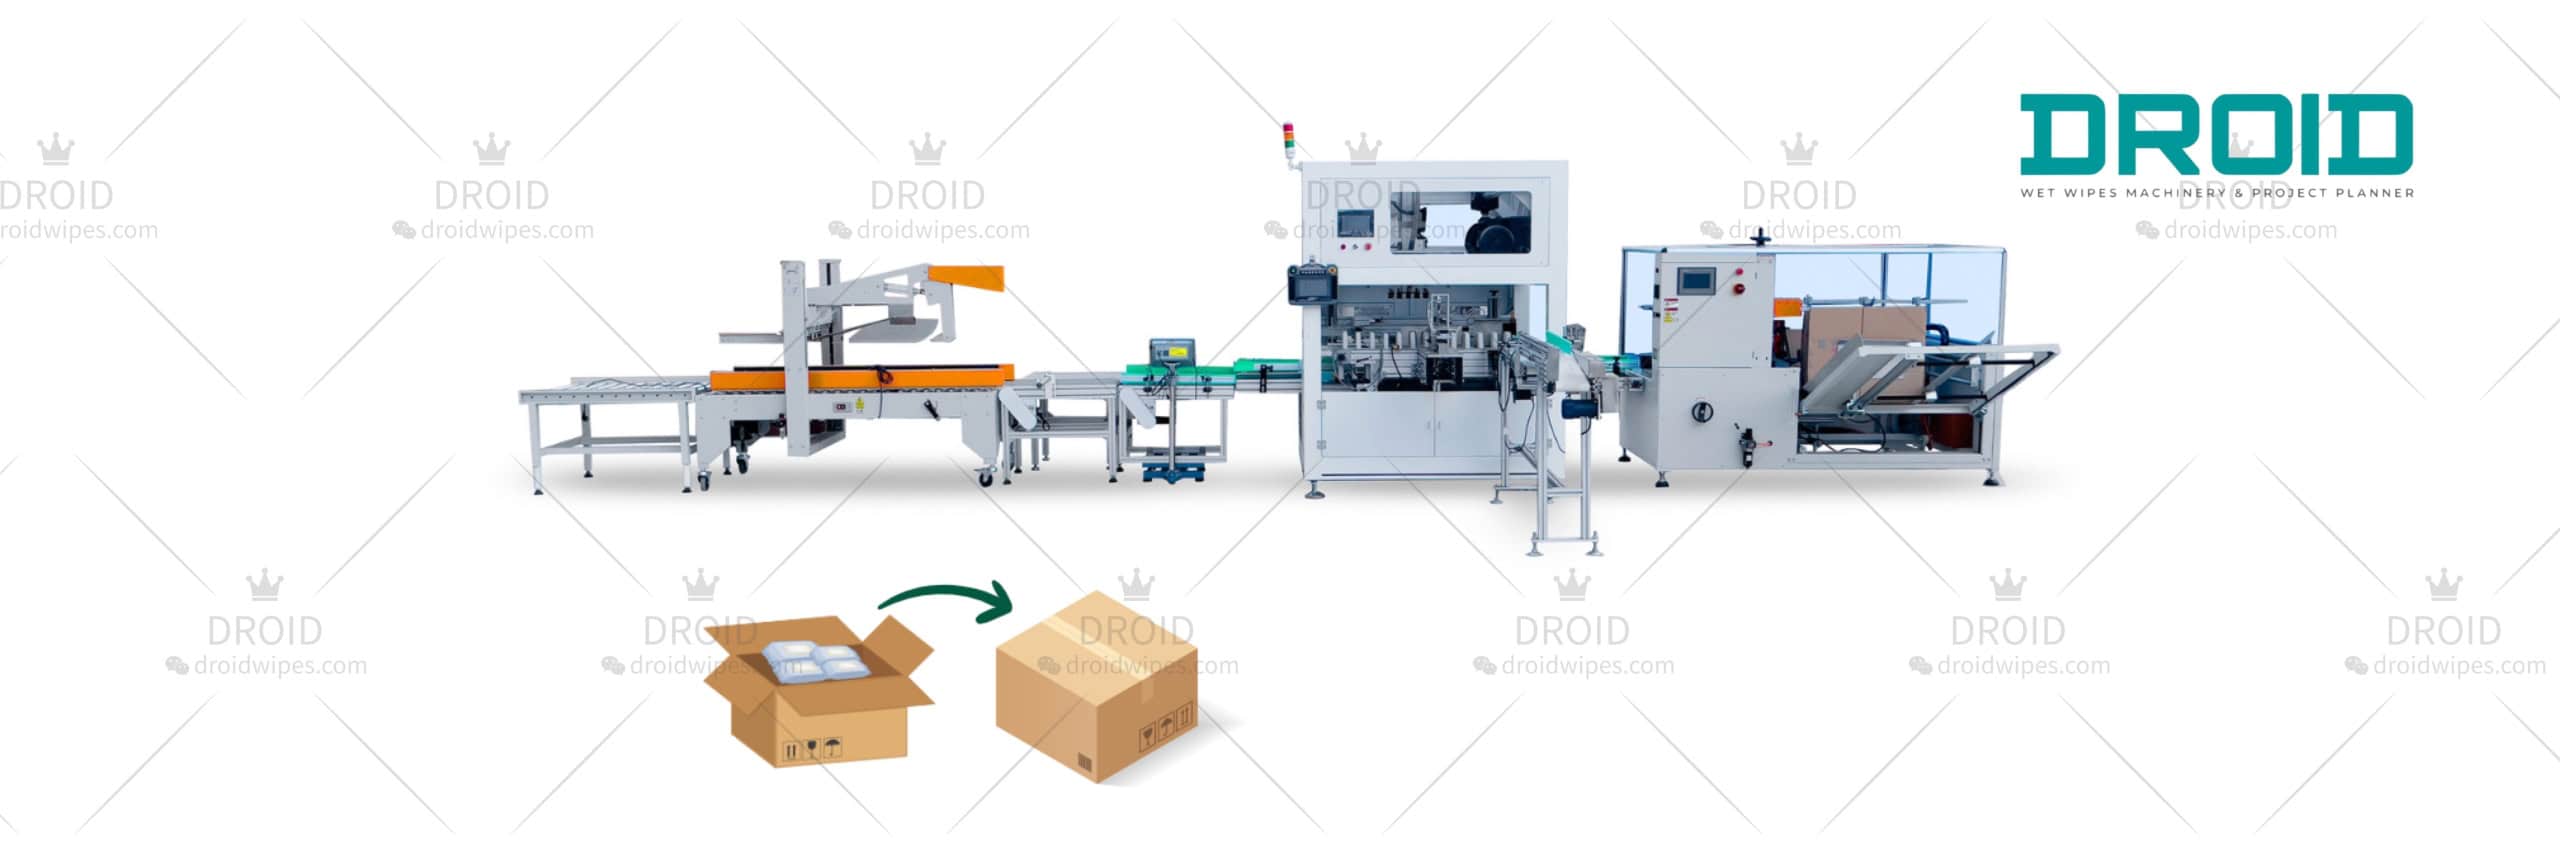 UT C300 Robotic Case Packer for Wet Wipes Production DROID  scaled - DH-250 Single Sachet Wet Wipes Machine